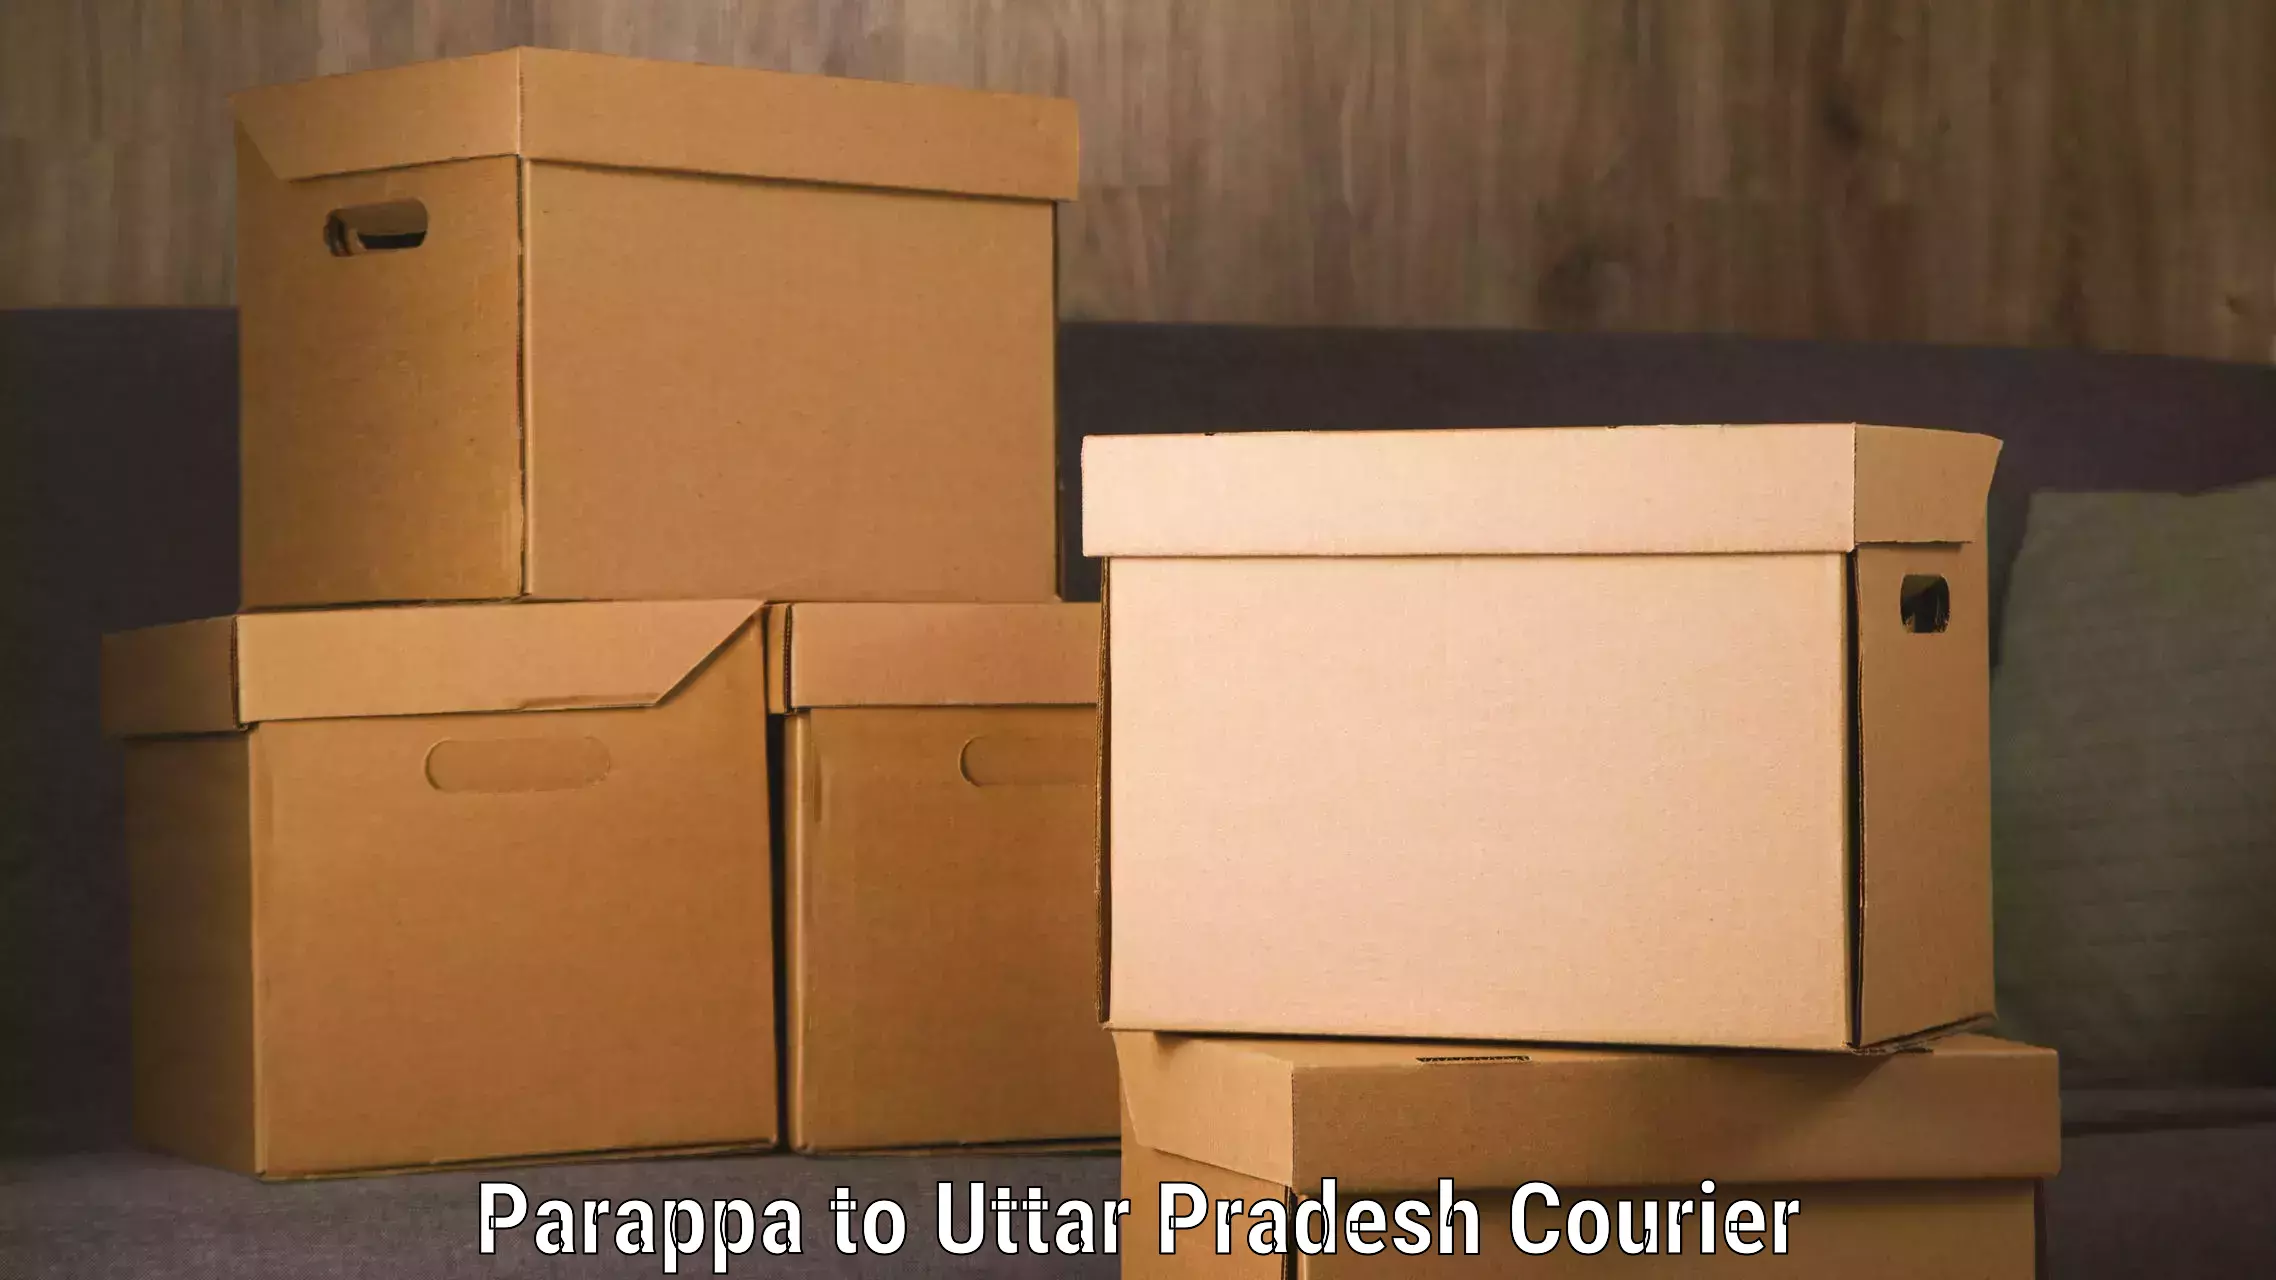 Efficient order fulfillment Parappa to Agra